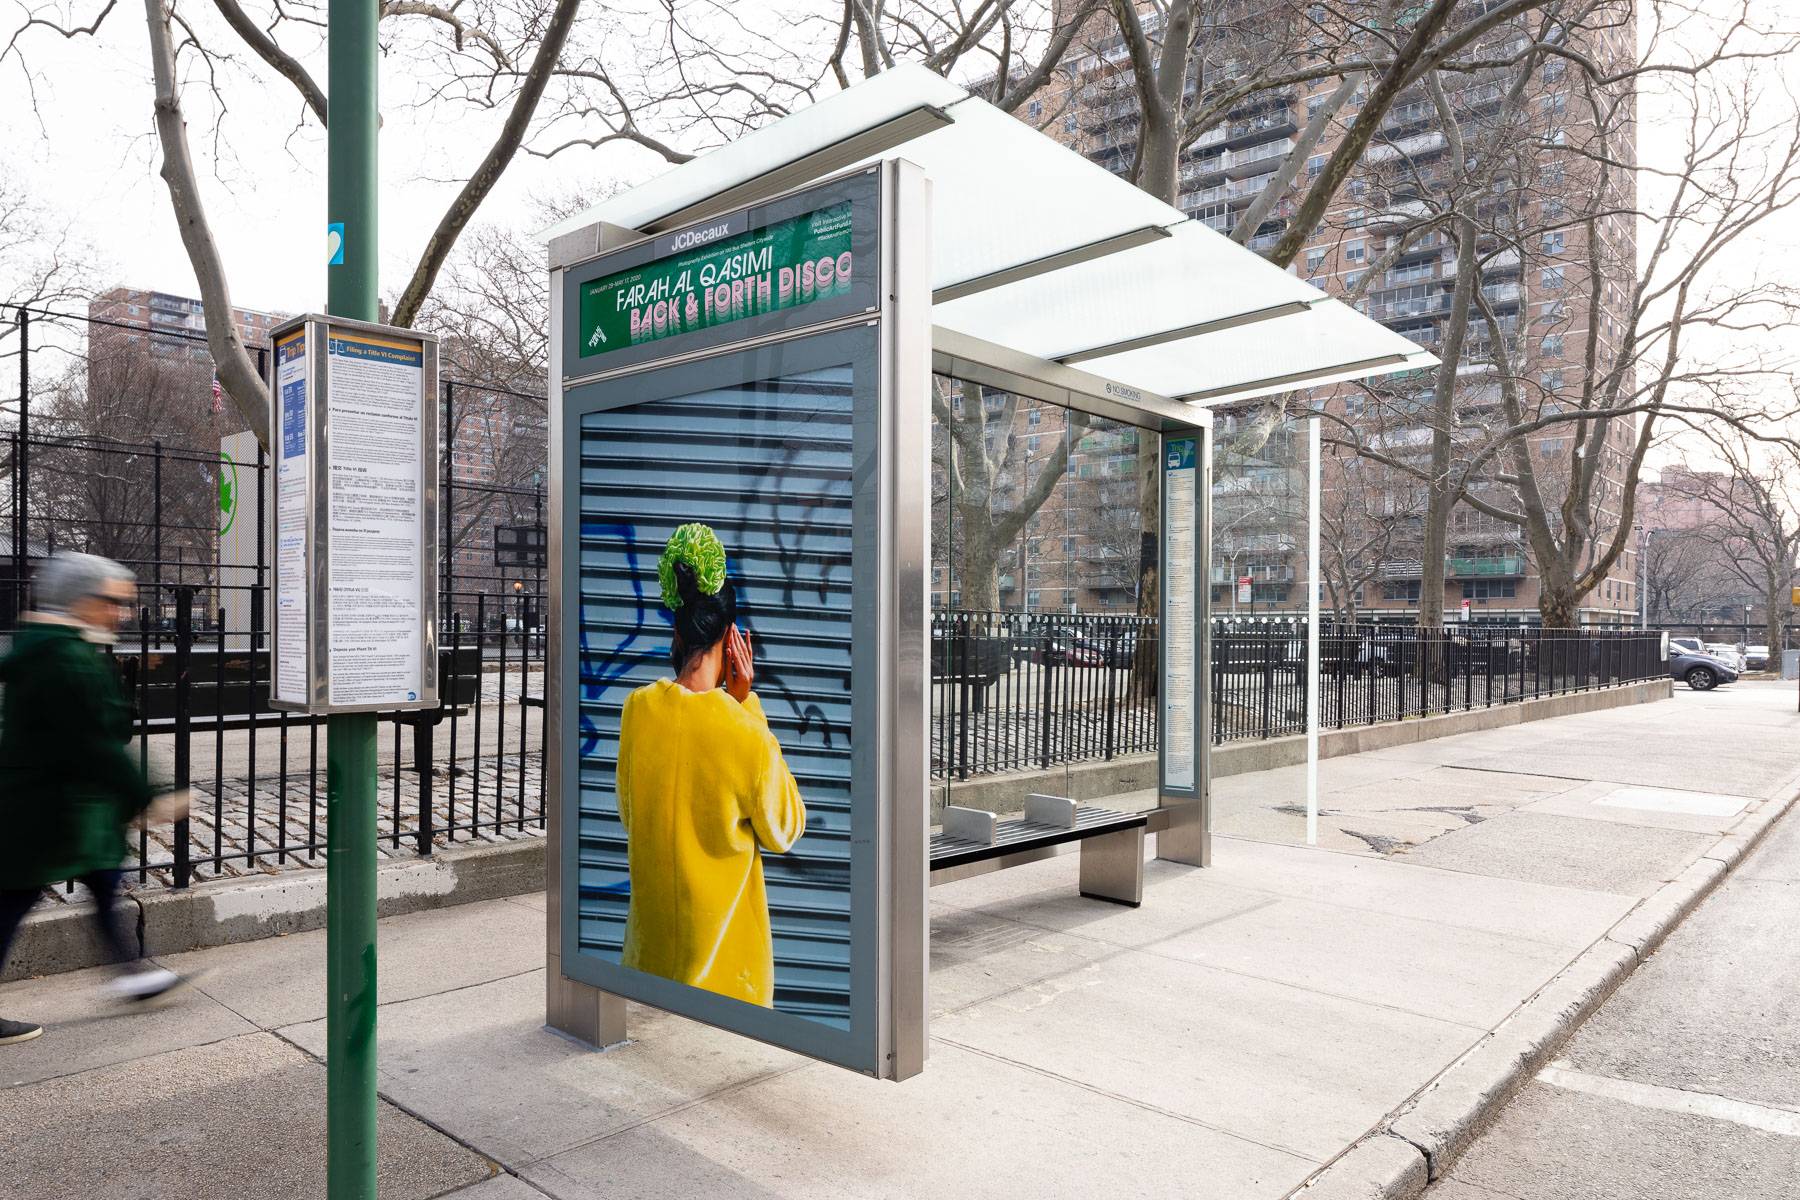 Farah Al Qasimi, “Woman on Phone” (2019). Photo: James Ewing, Courtesy of Public Art Fund, NY.  Photographic work as a part of Back and Forth Disco, presented by Public Art Fund on 100 JCDecaux bus shelters citywide, January 29 – May 17, 2020